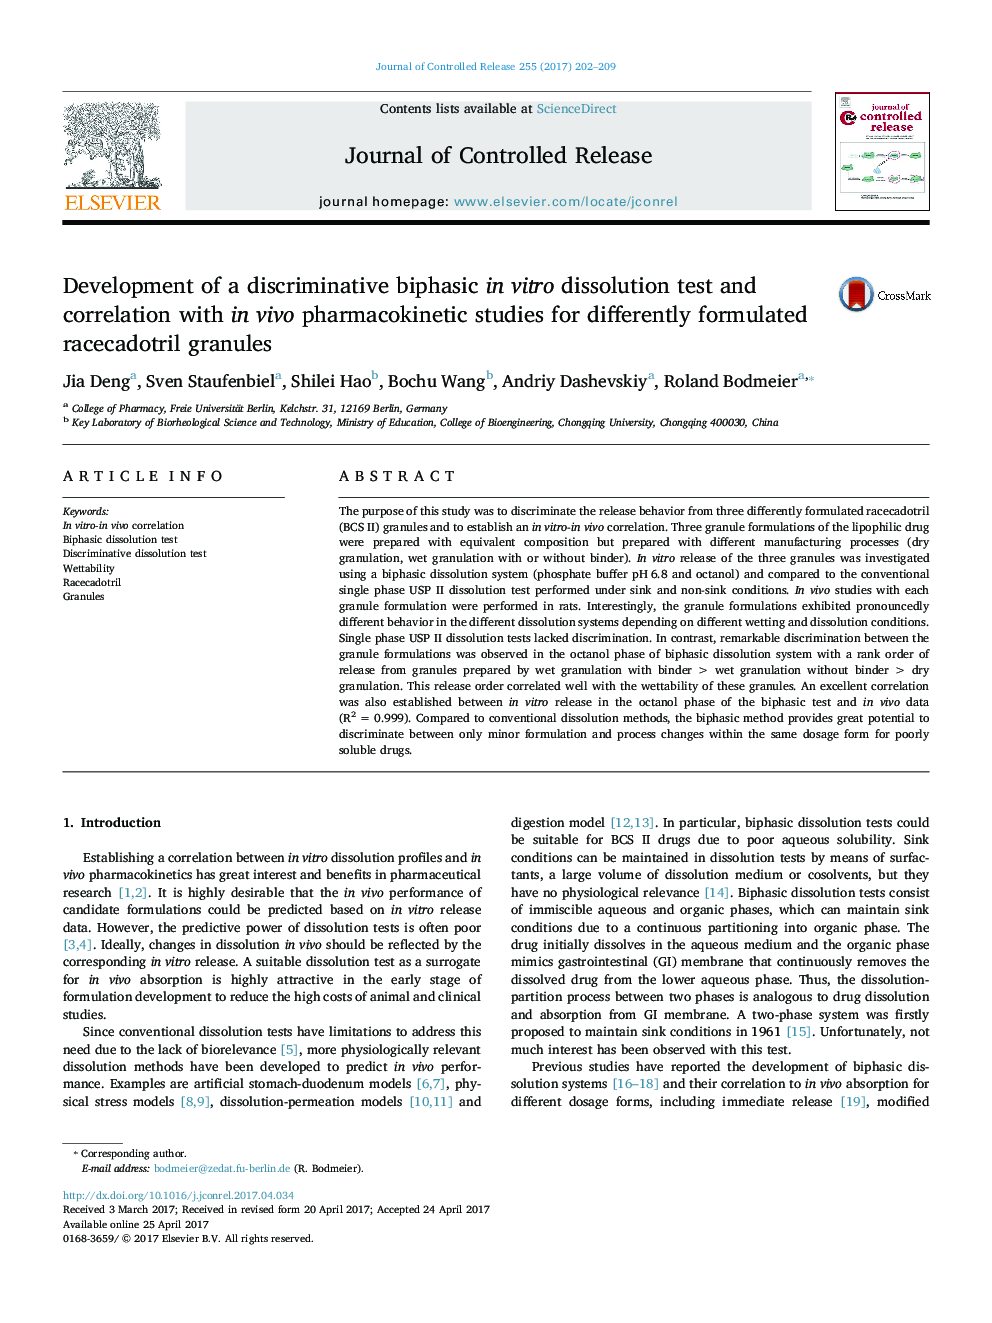 Development of a discriminative biphasic in vitro dissolution test and correlation with in vivo pharmacokinetic studies for differently formulated racecadotril granules